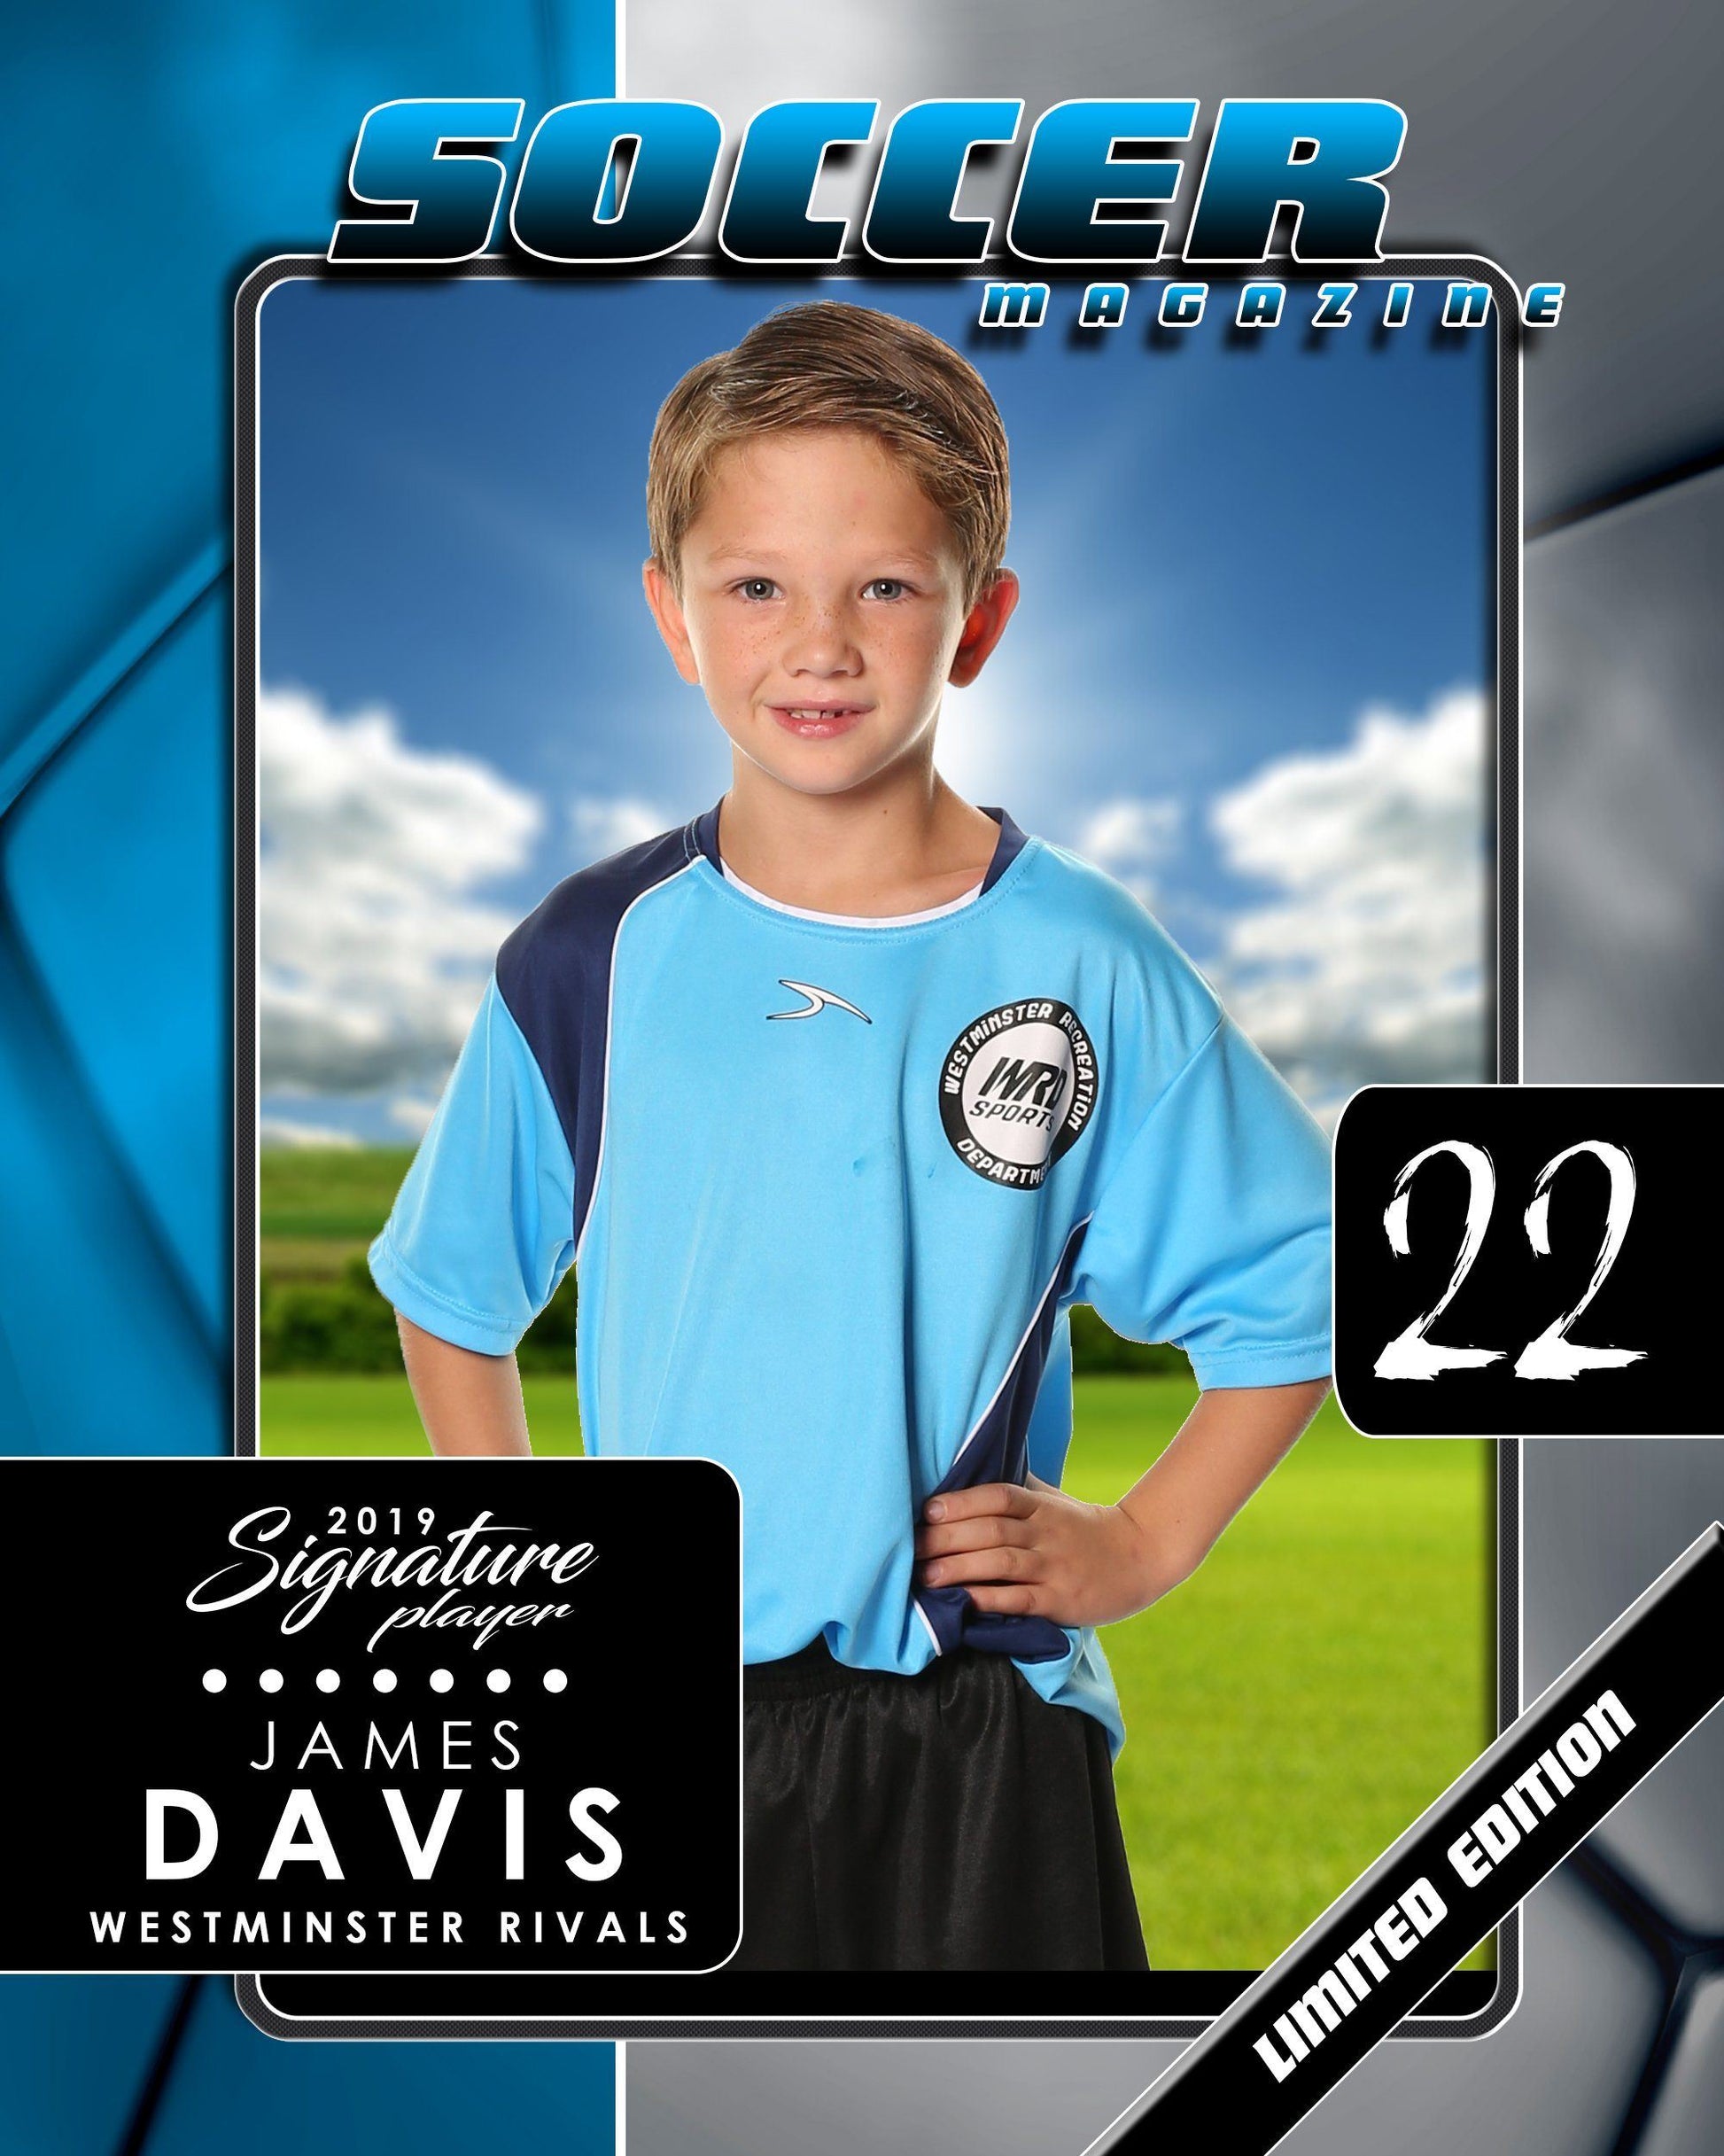 Signature Player - Soccer - V1 - Drop-In Magazine Cover Template-Photoshop Template - Photo Solutions